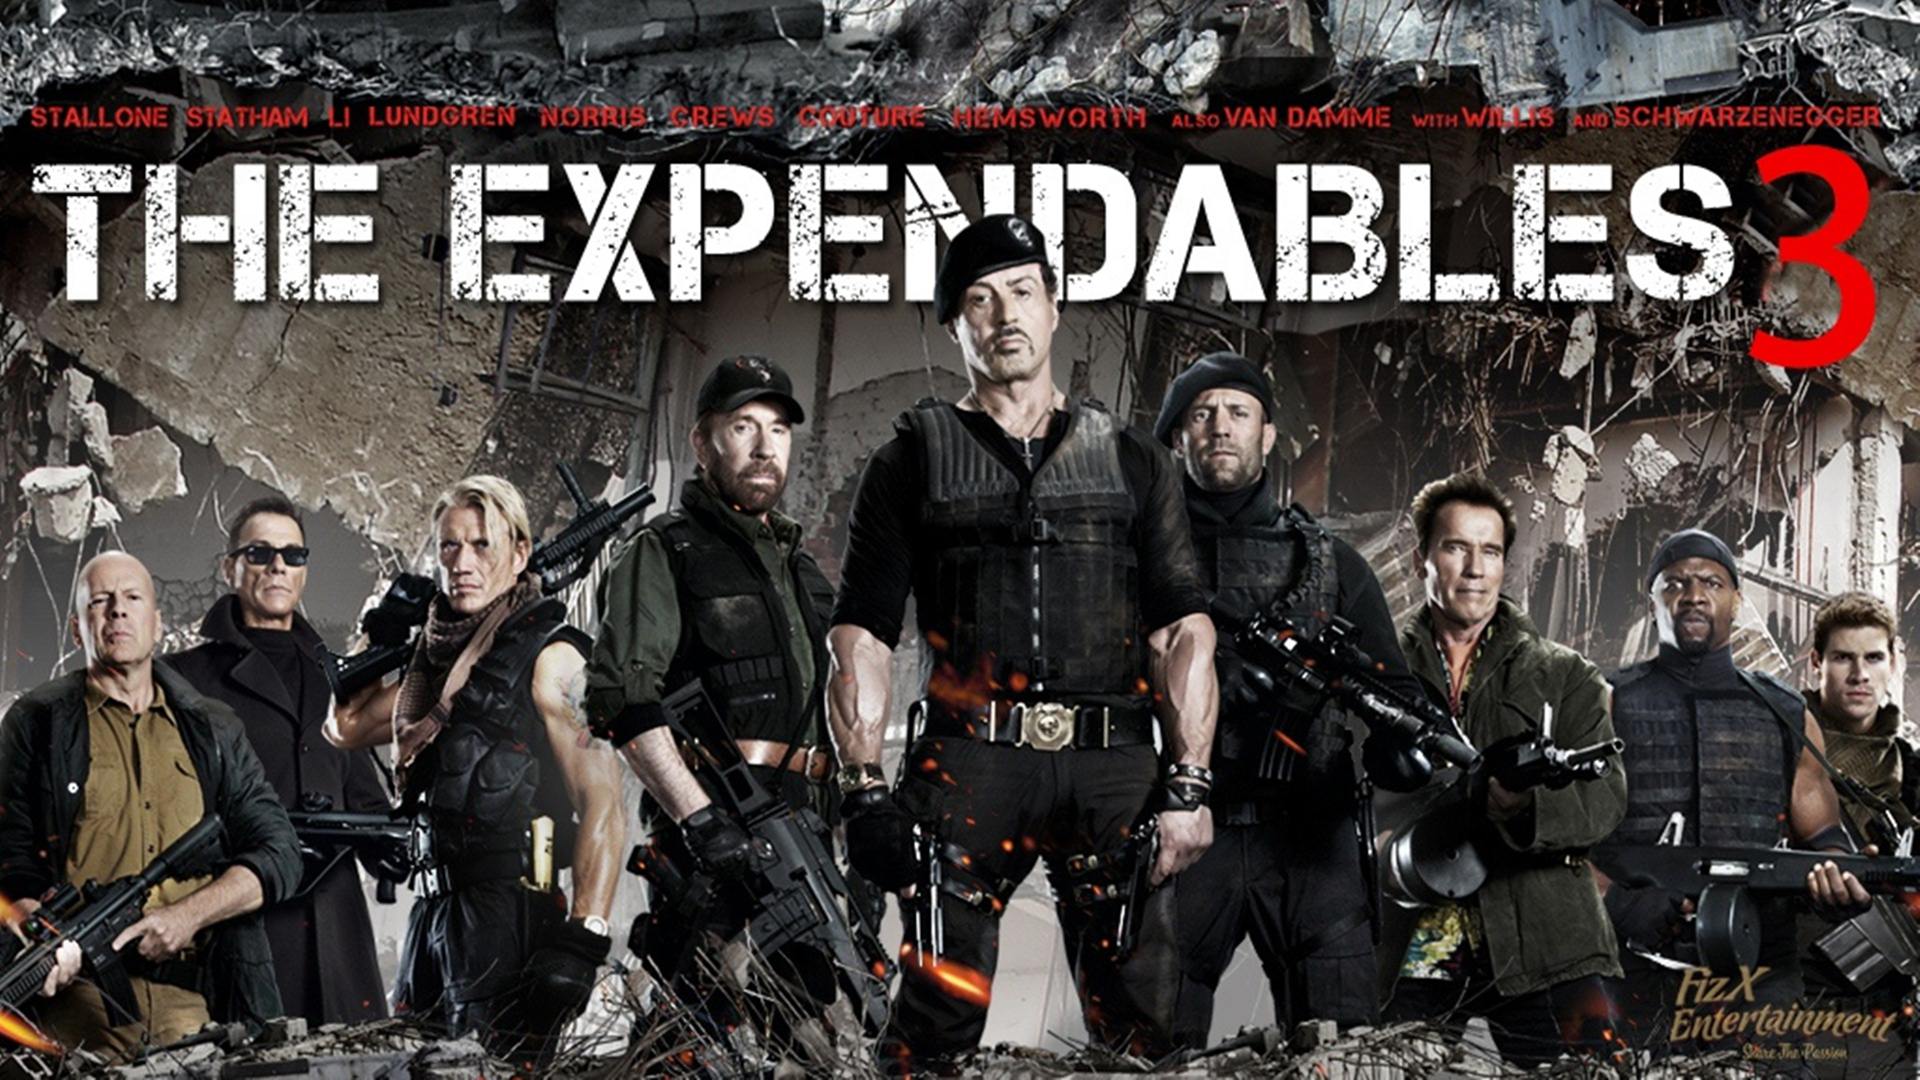 The Expendables 3 HD wallpapers, Desktop wallpaper - most viewed